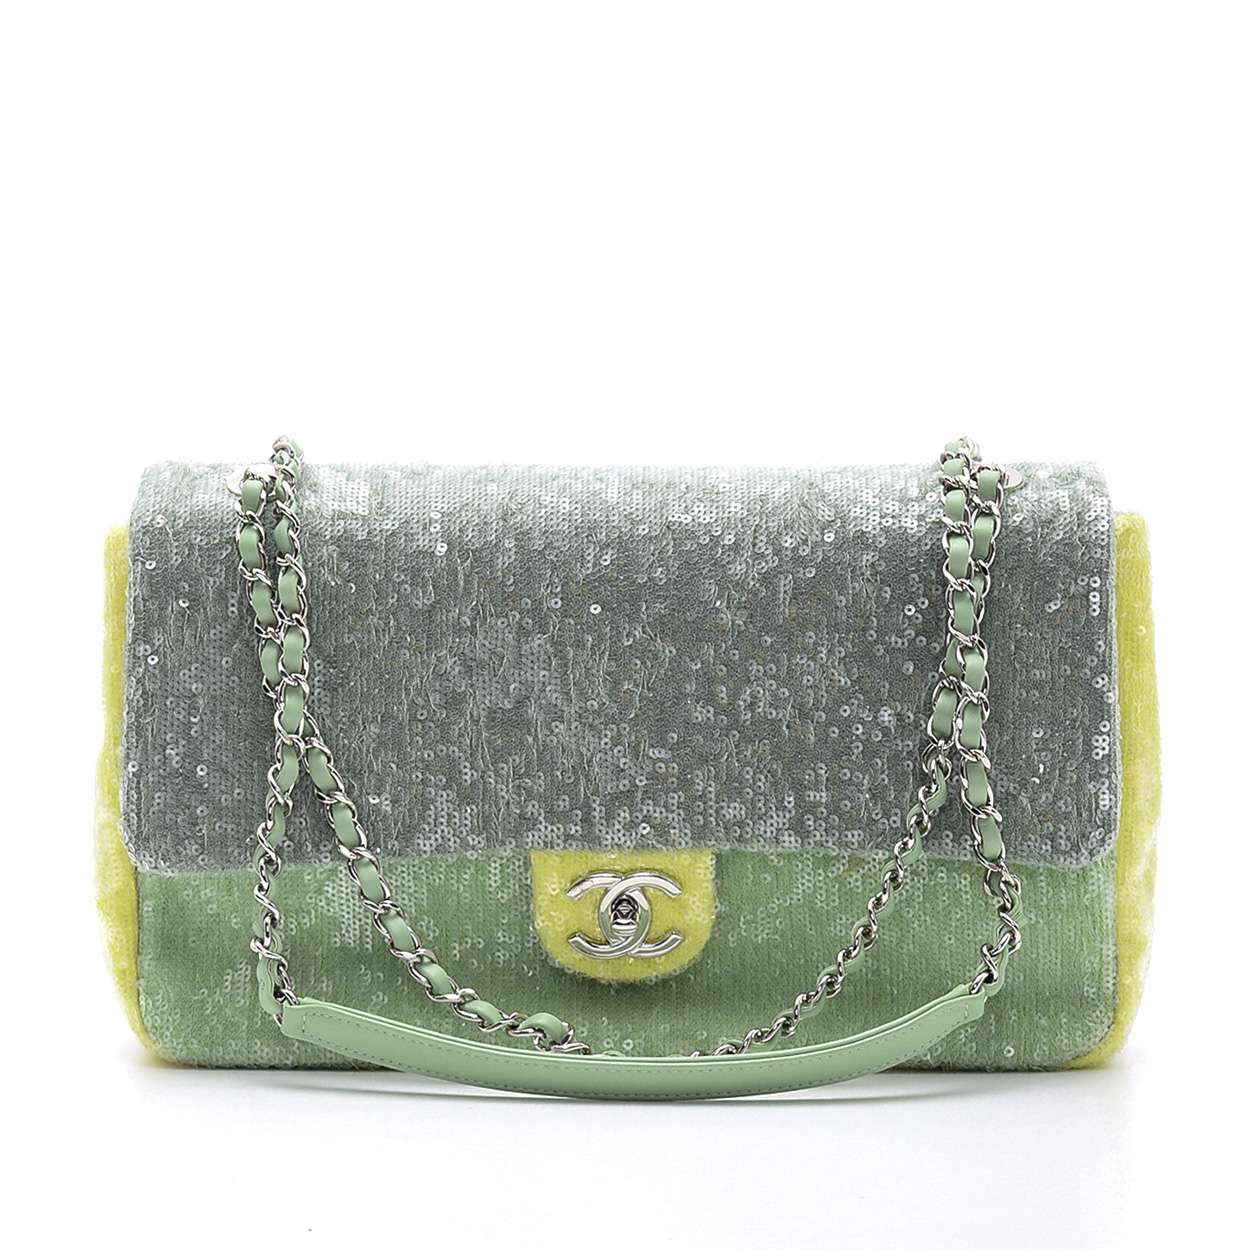 Chanel - Tricolor Sequin Classic Limited Edition Jumbo Flap Bag